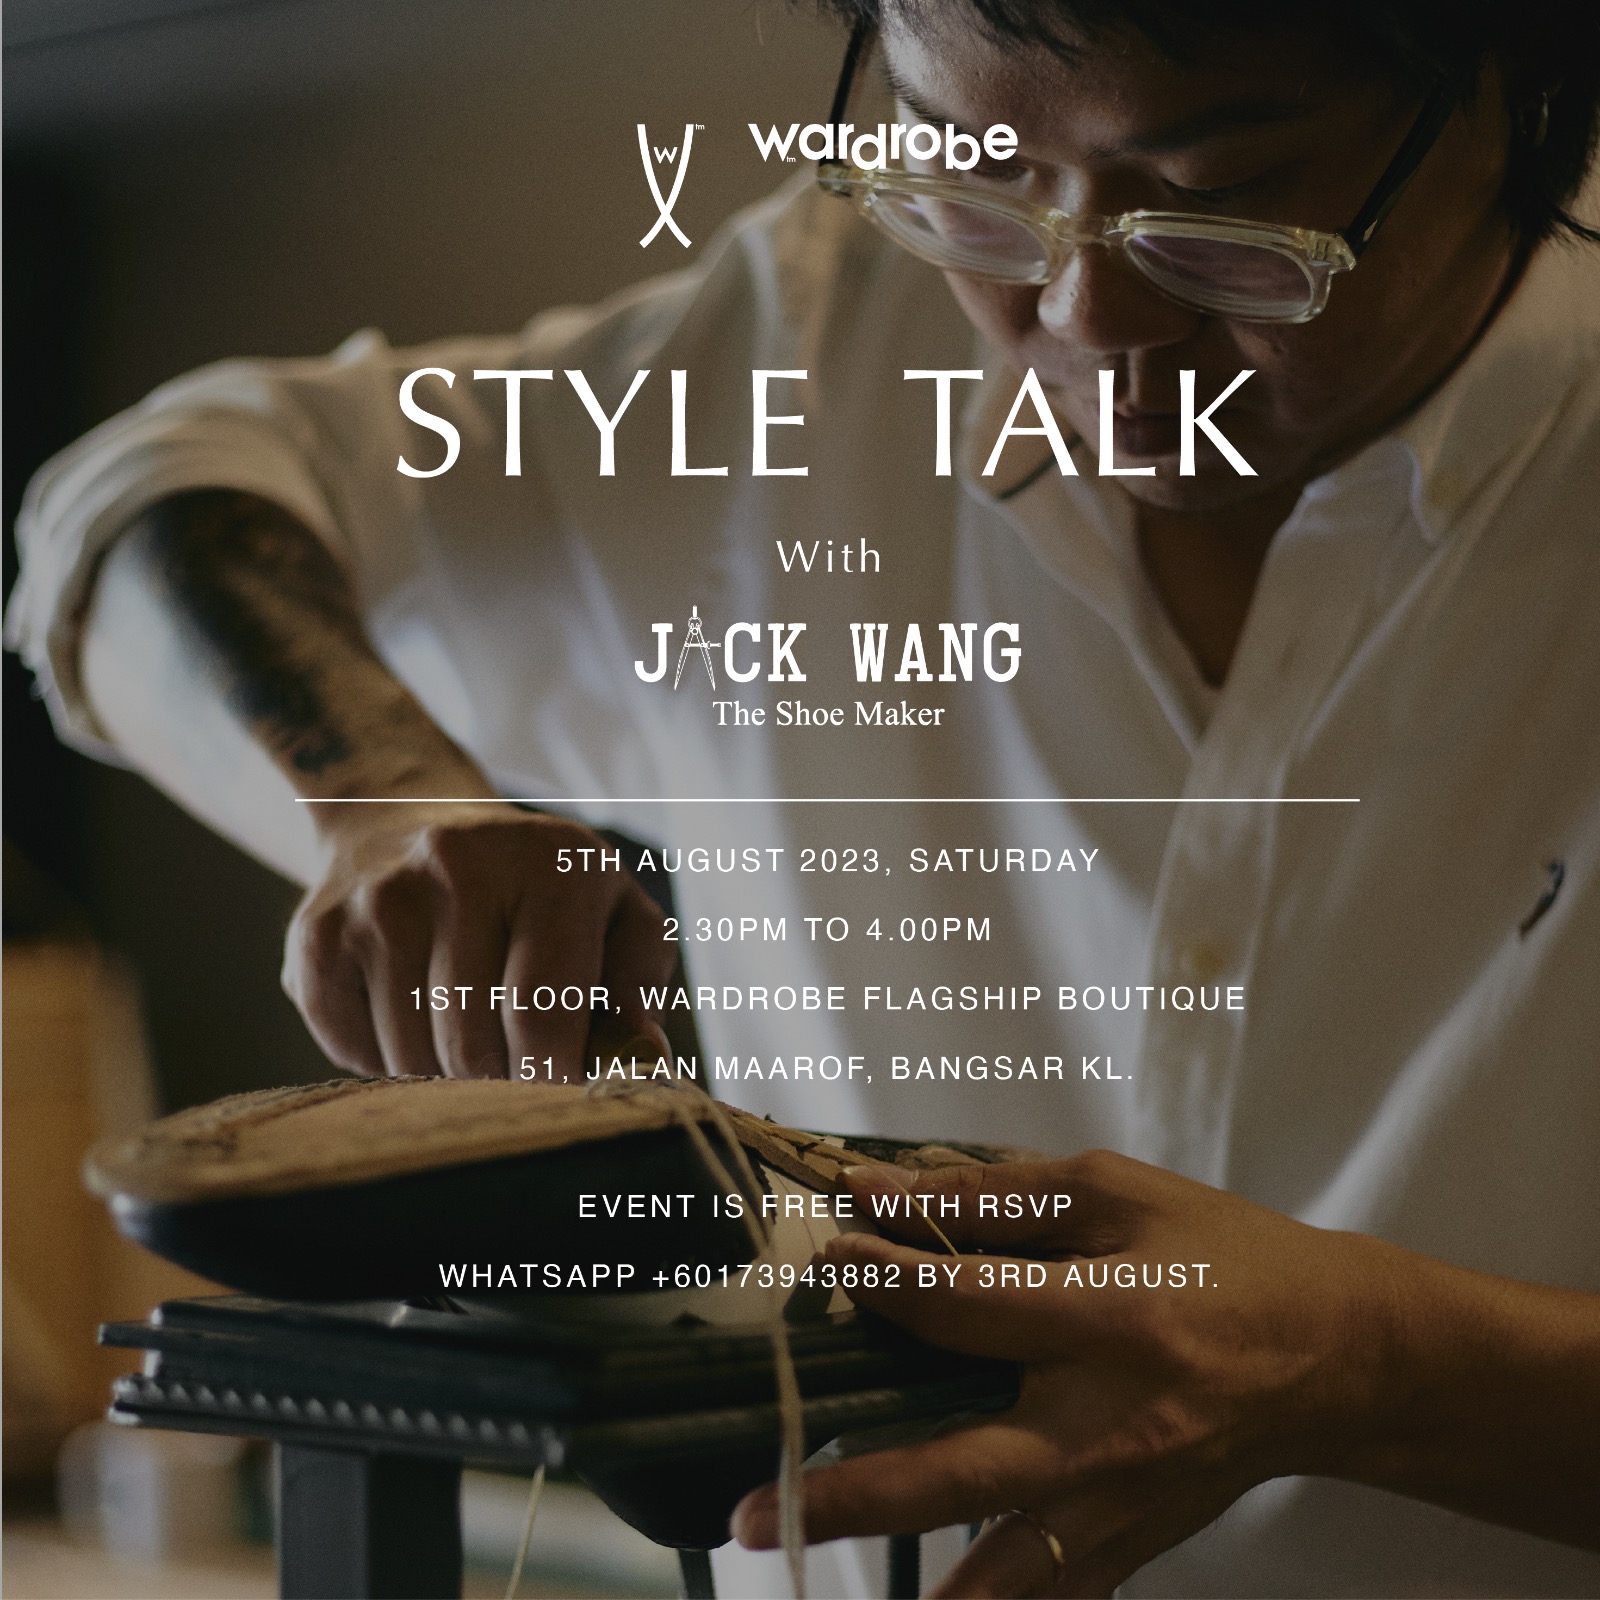 Style Talk with Jack Wang 'The Shoe Maker' event invitation.